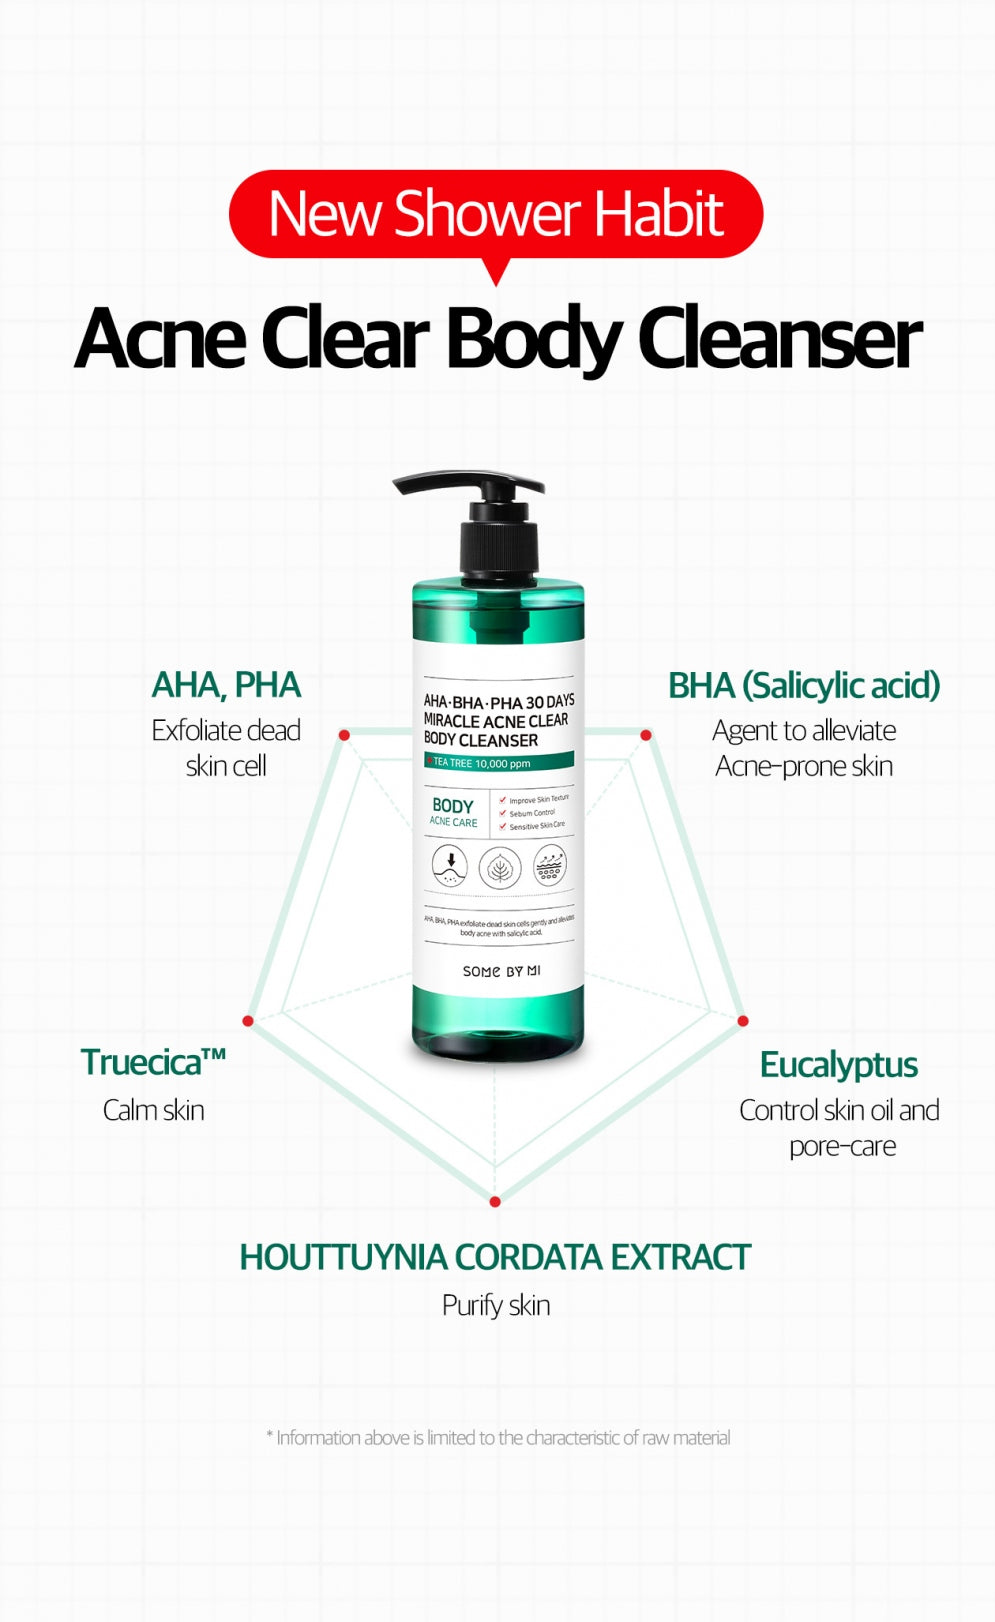 AHA-BHA-PHA Miracle Acne Body cleanser by Some by mi